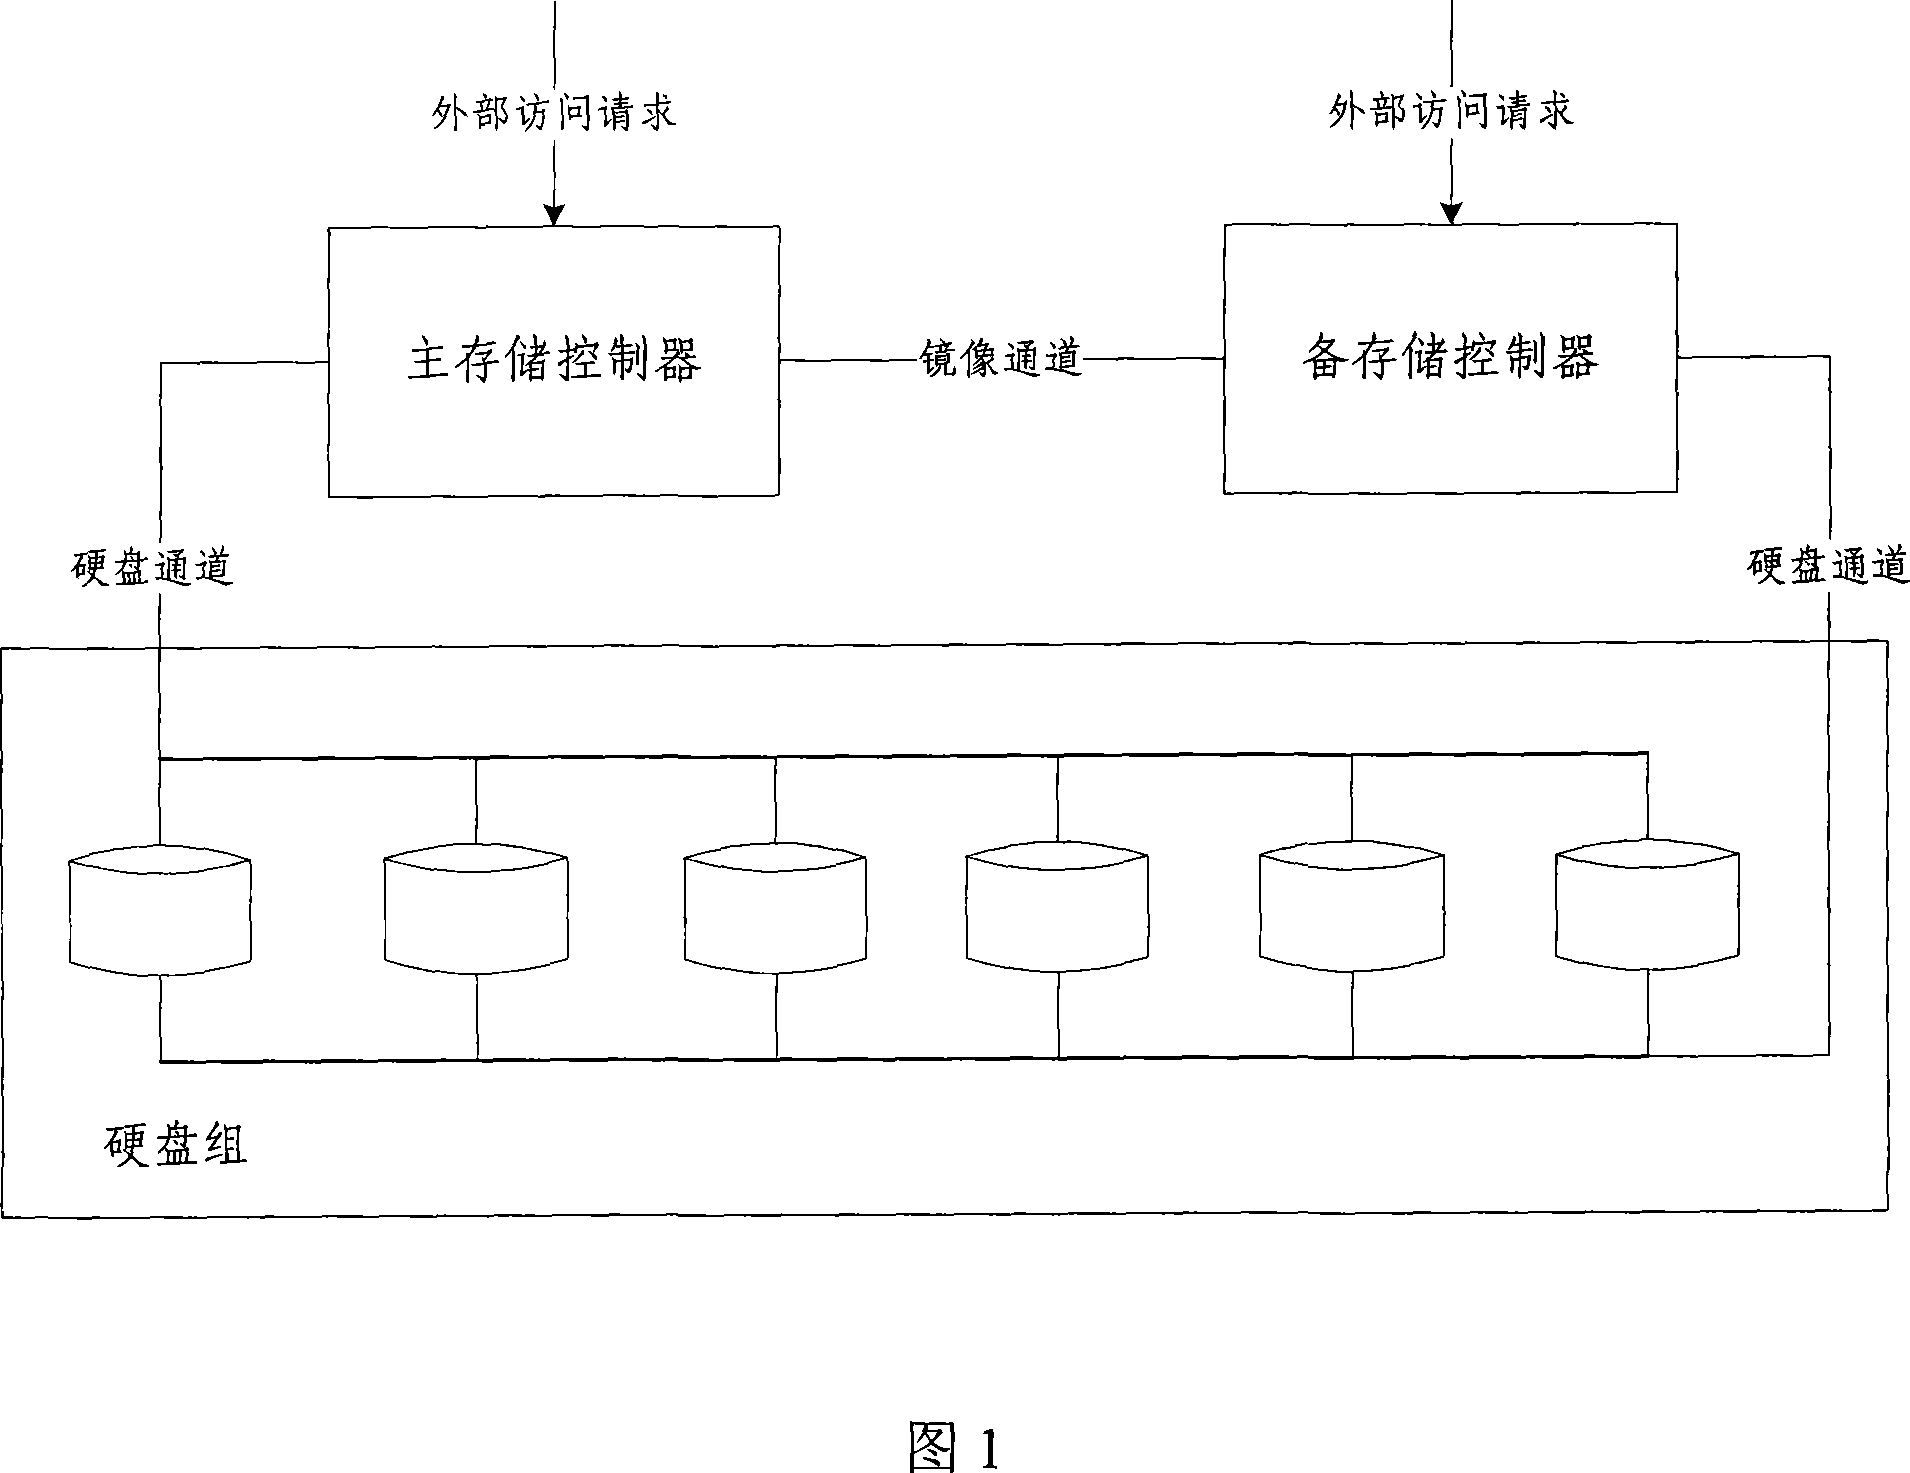 Memory array system and its data operation method